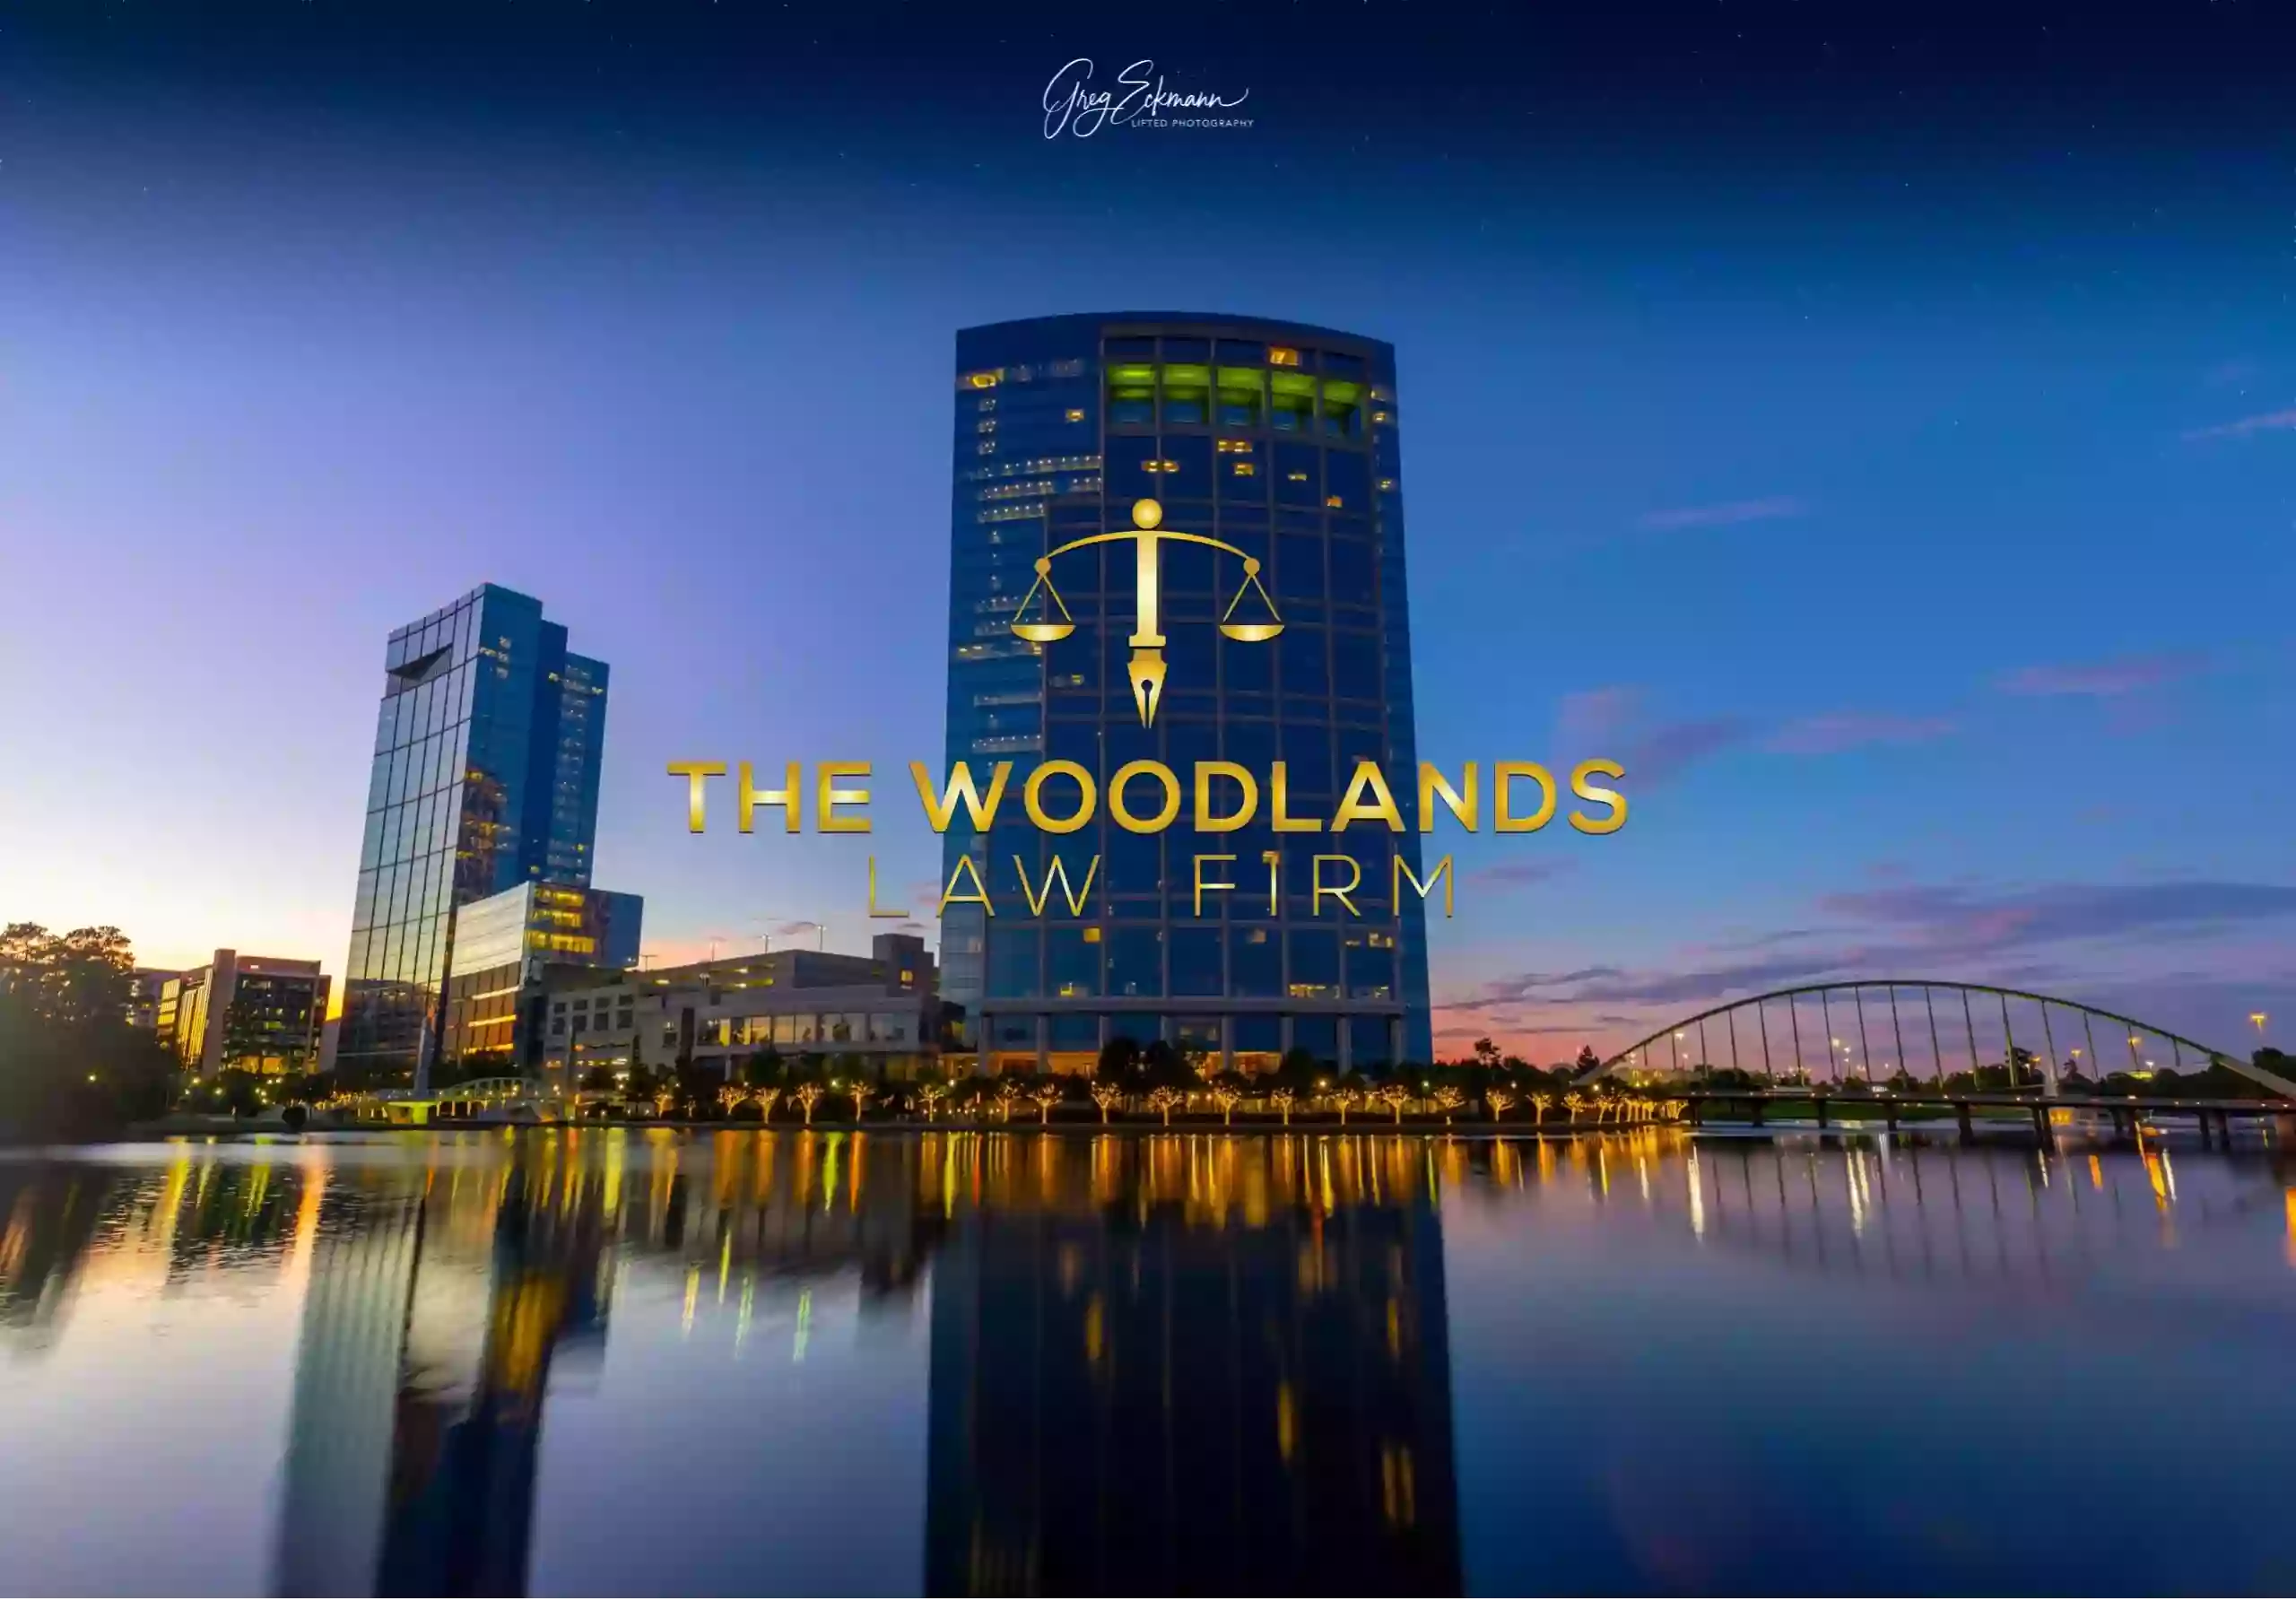 The Woodlands Law Firm